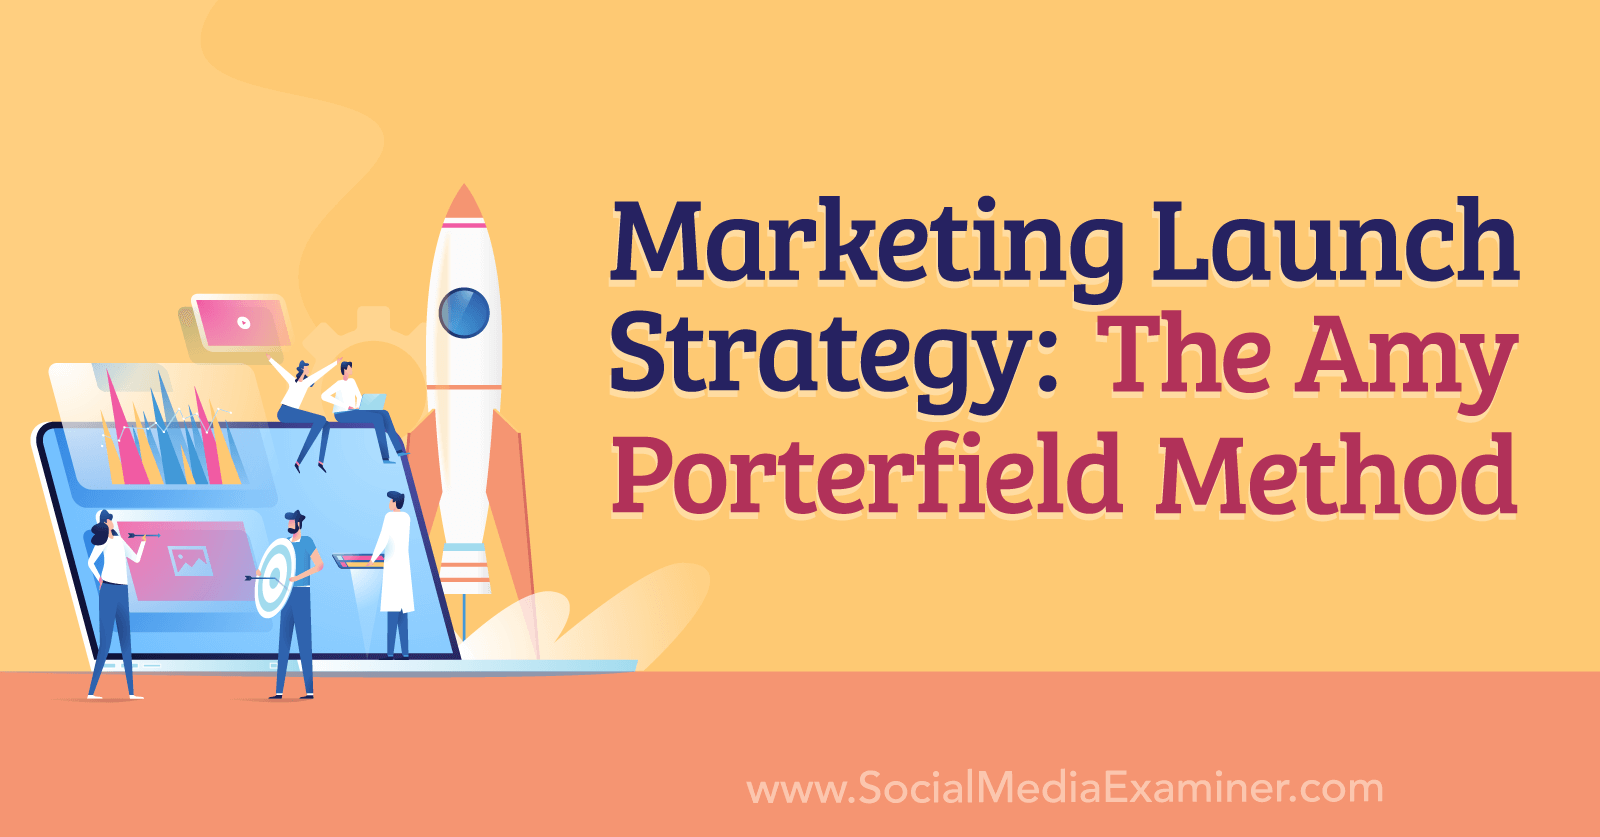 Marketing Launch Strategy: The Amy Porterfield Method by Social Media Examiner